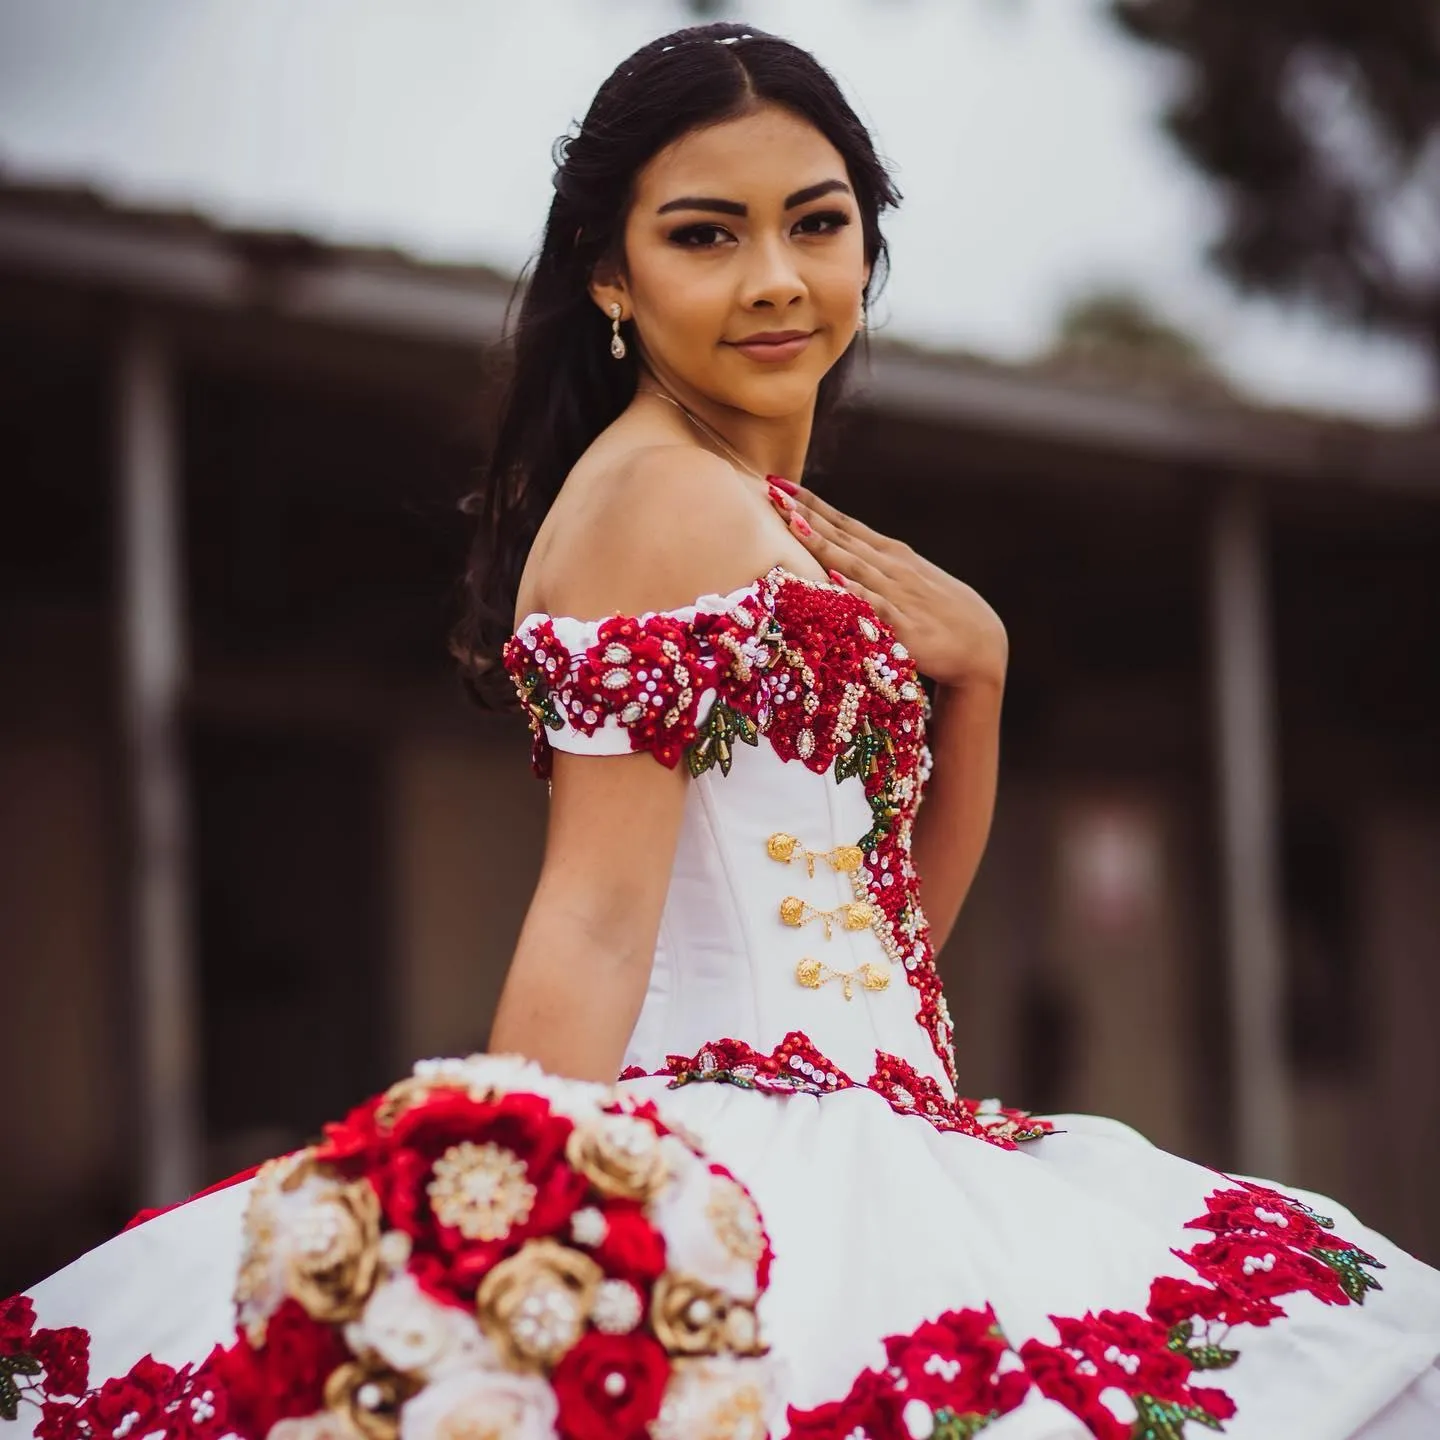 mexican style dress